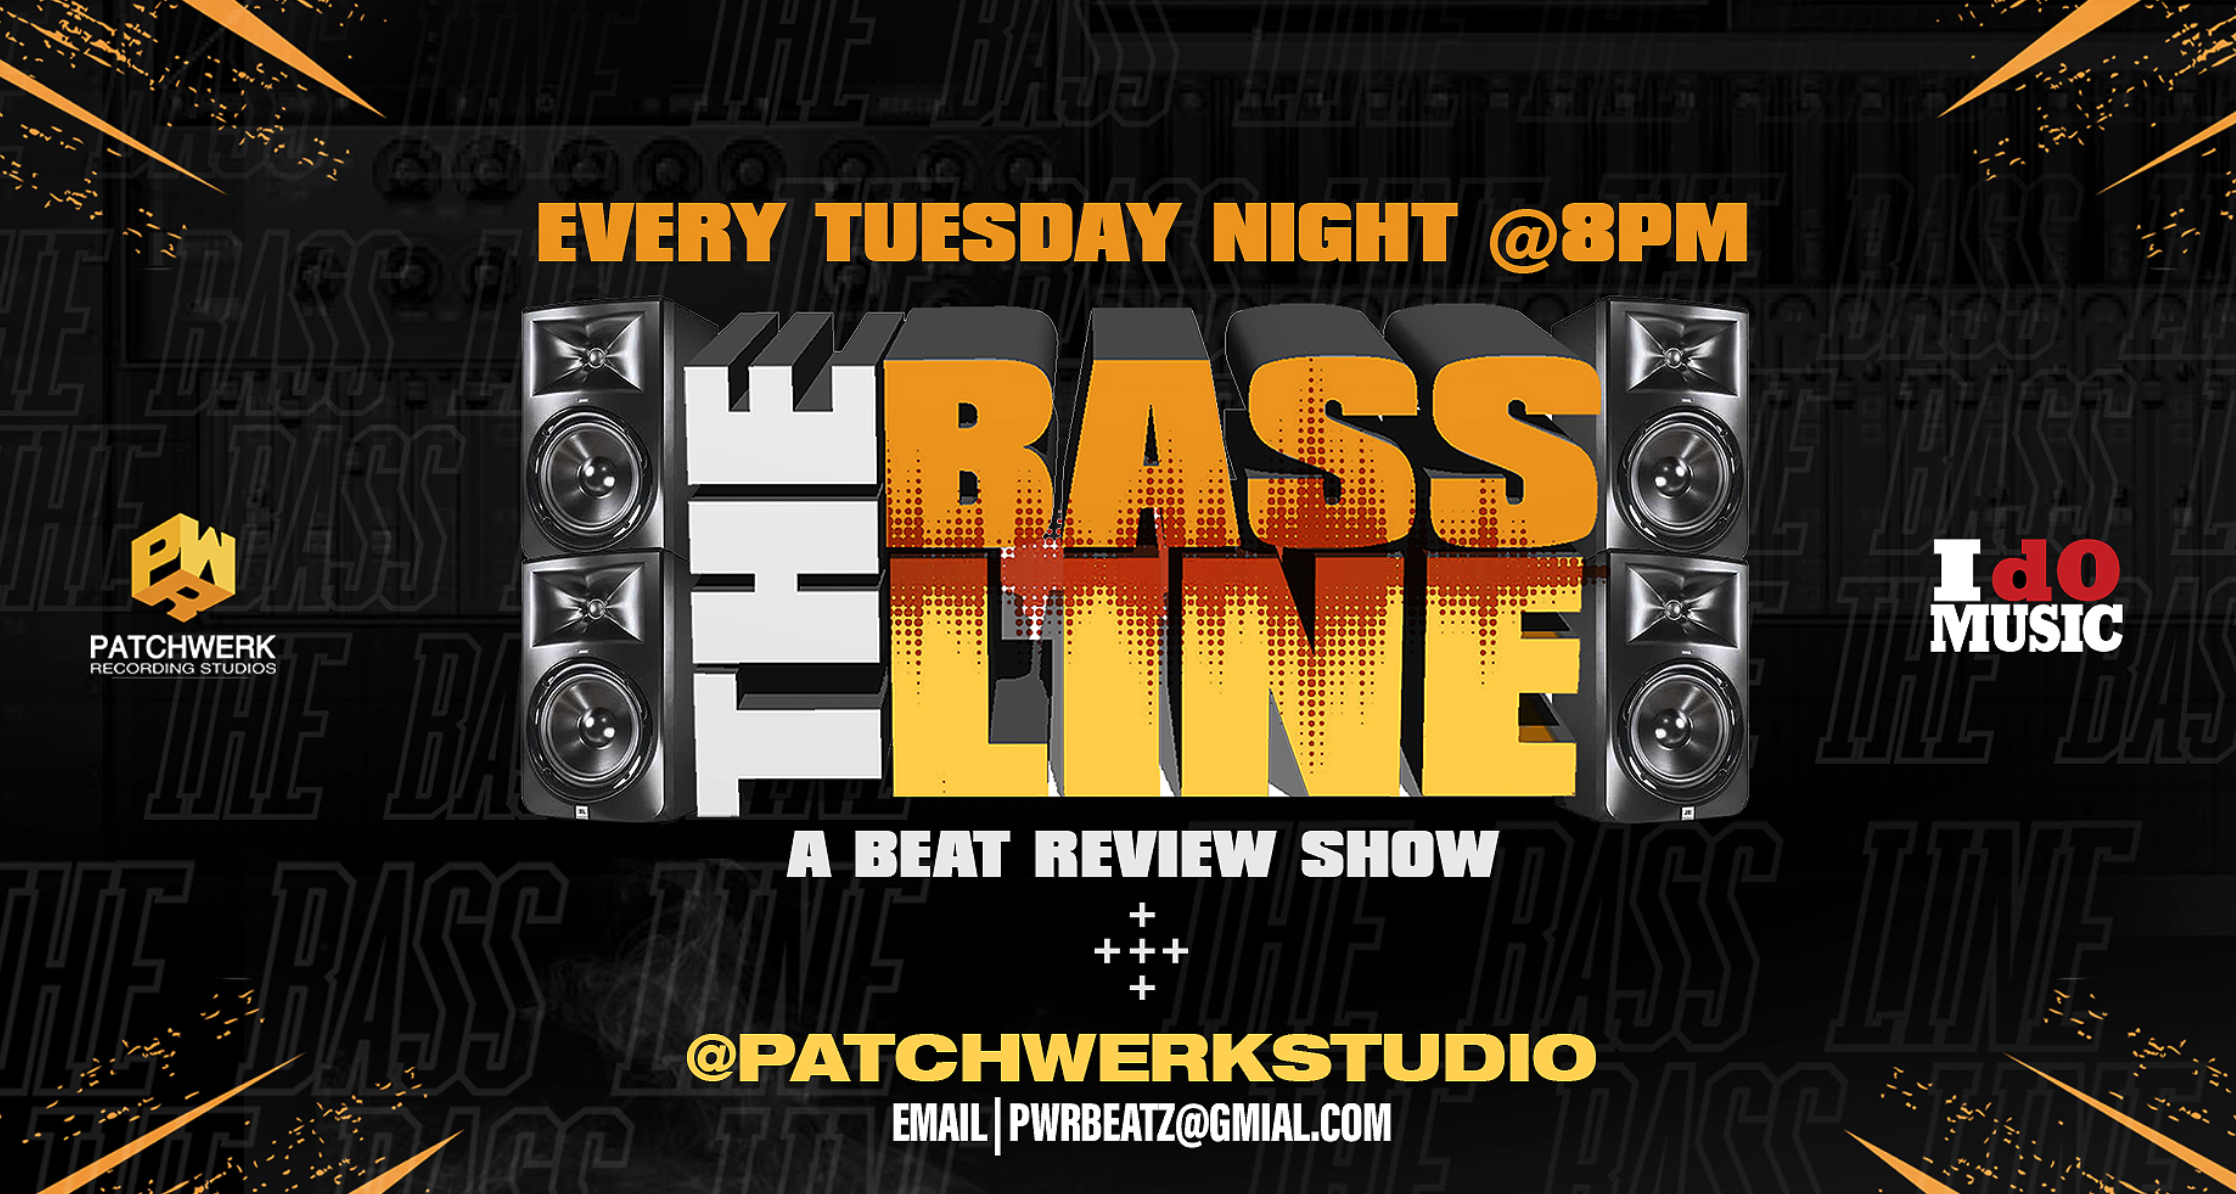 Patchwerk Presents: The Bassline Online Producer Review Show 3/3/20